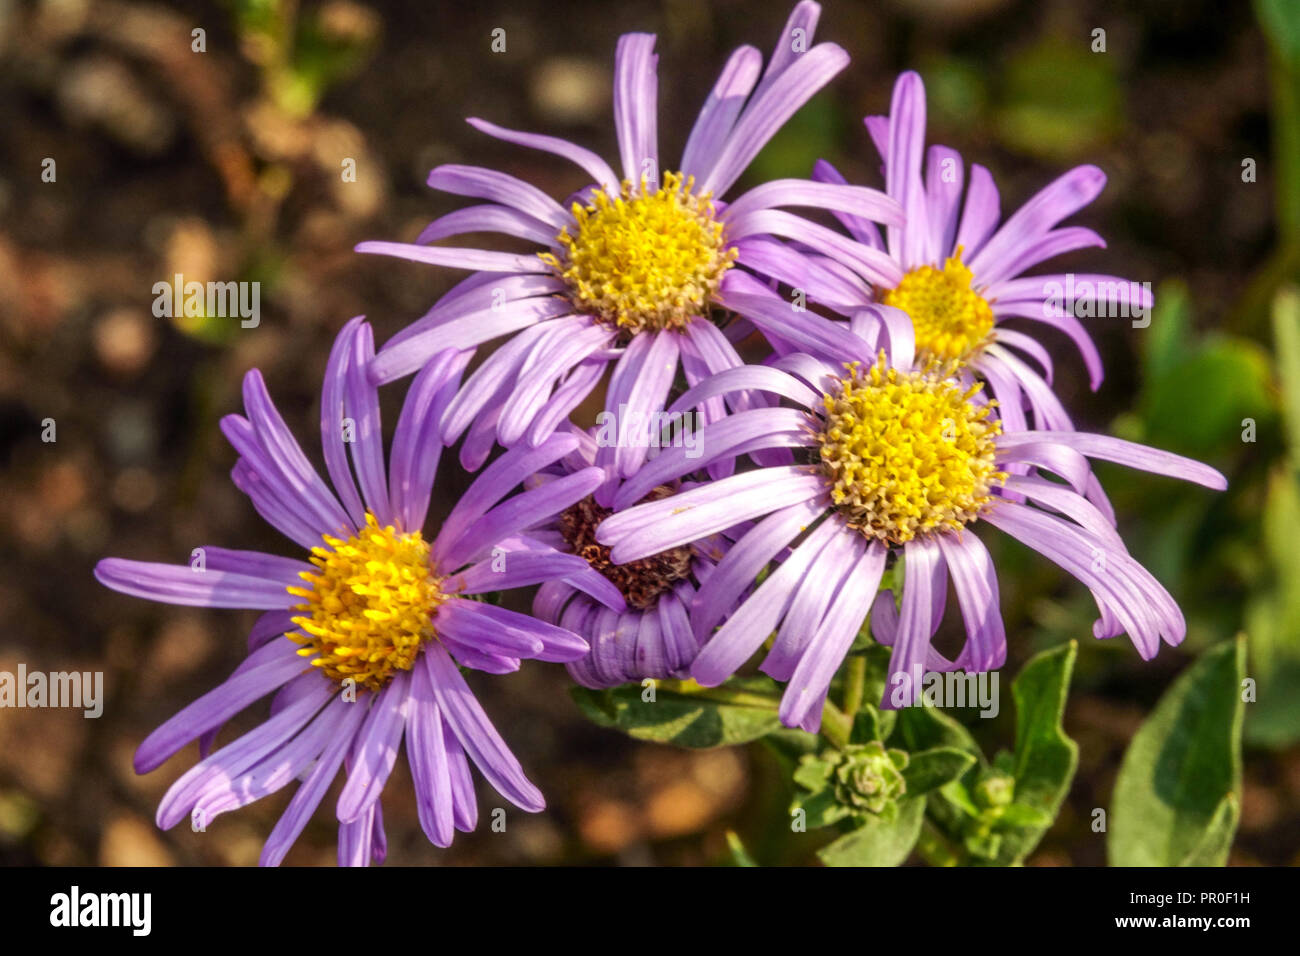 Italian Aster, Aster amellus 'King George' Stock Photo